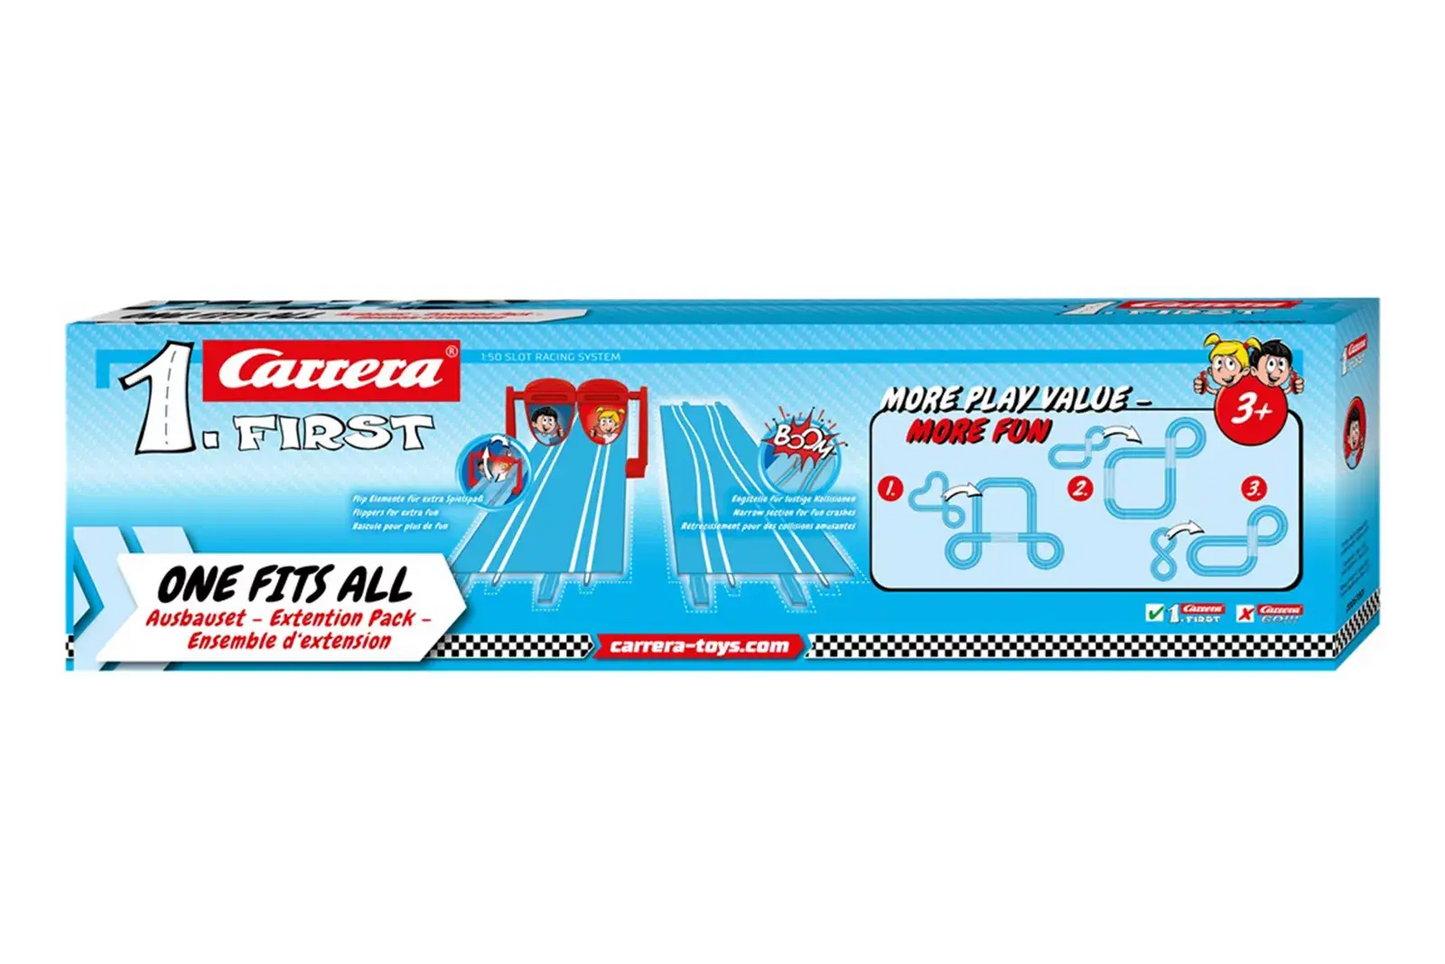 Carrera First Extension Set (1:50 Scale)